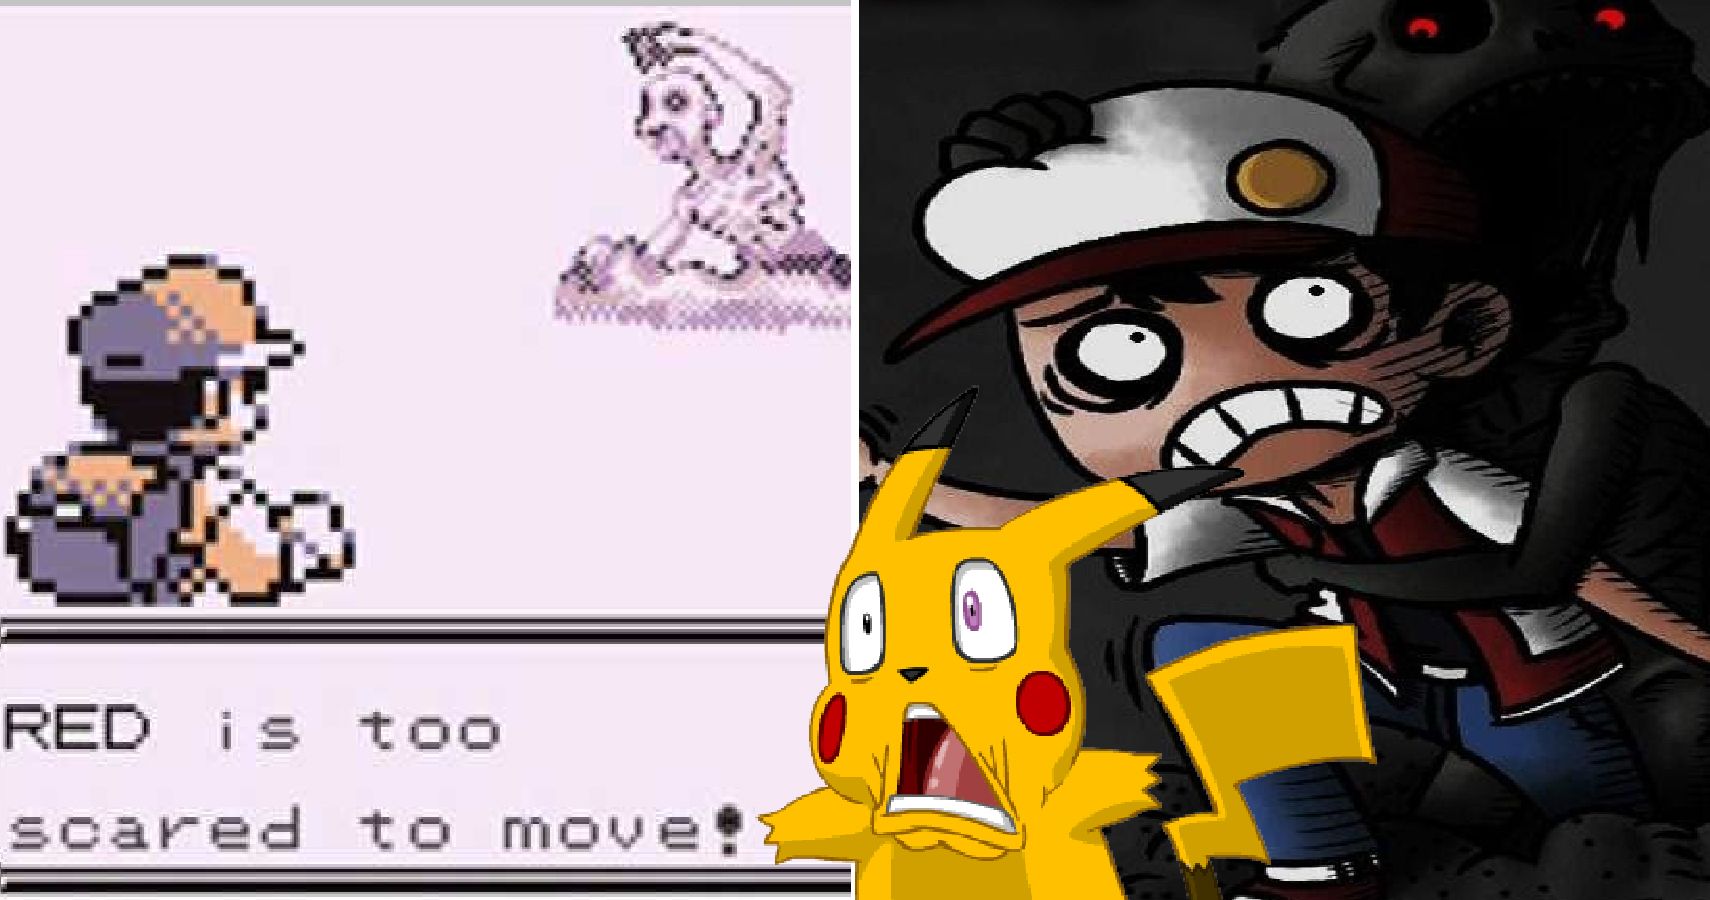 Pokémon Global News - Mew obtain using a glitch on Pokémon Red, Blue, Green  & Yellow can not be transfered to Pokémon Sun & Moon MissingNo can't be  transferred to Pokémon Sun